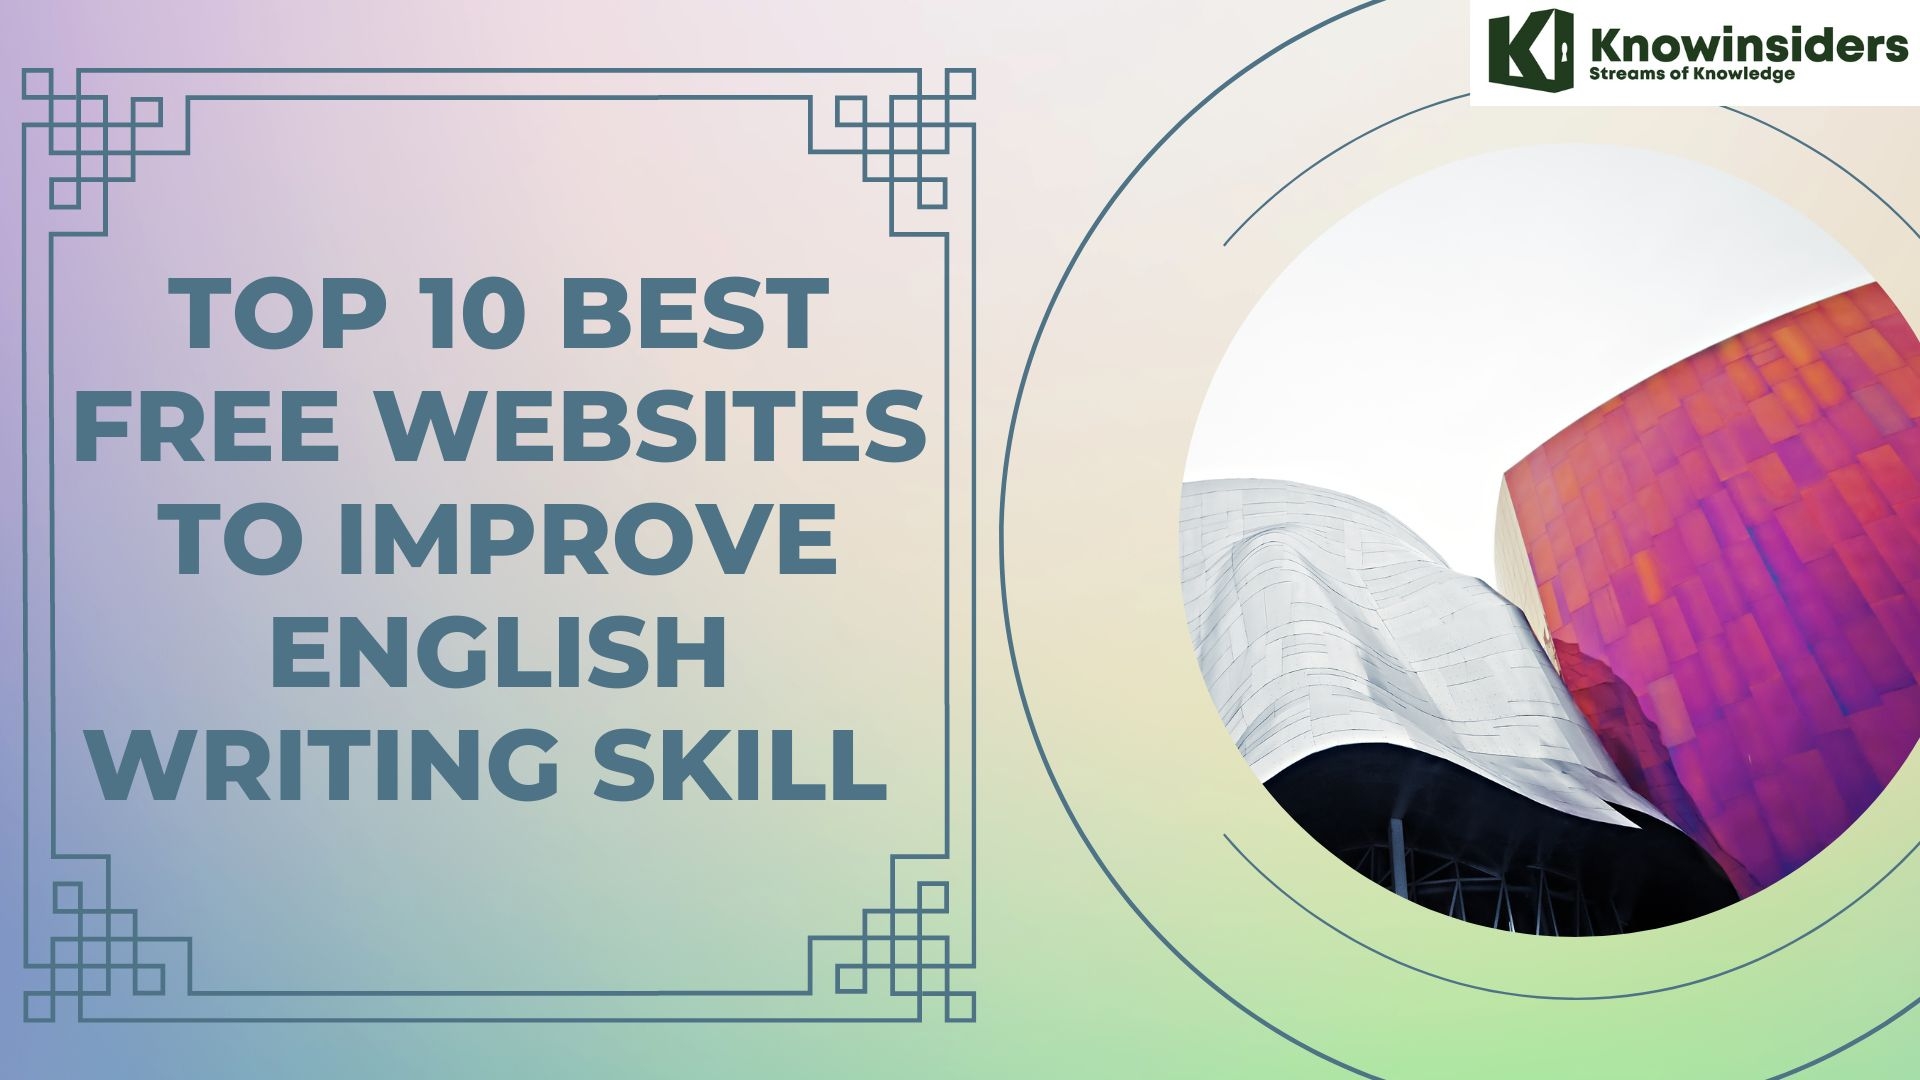 Top 10 Best Free Websites To Improve English Writing Skill Knowinsiders.com